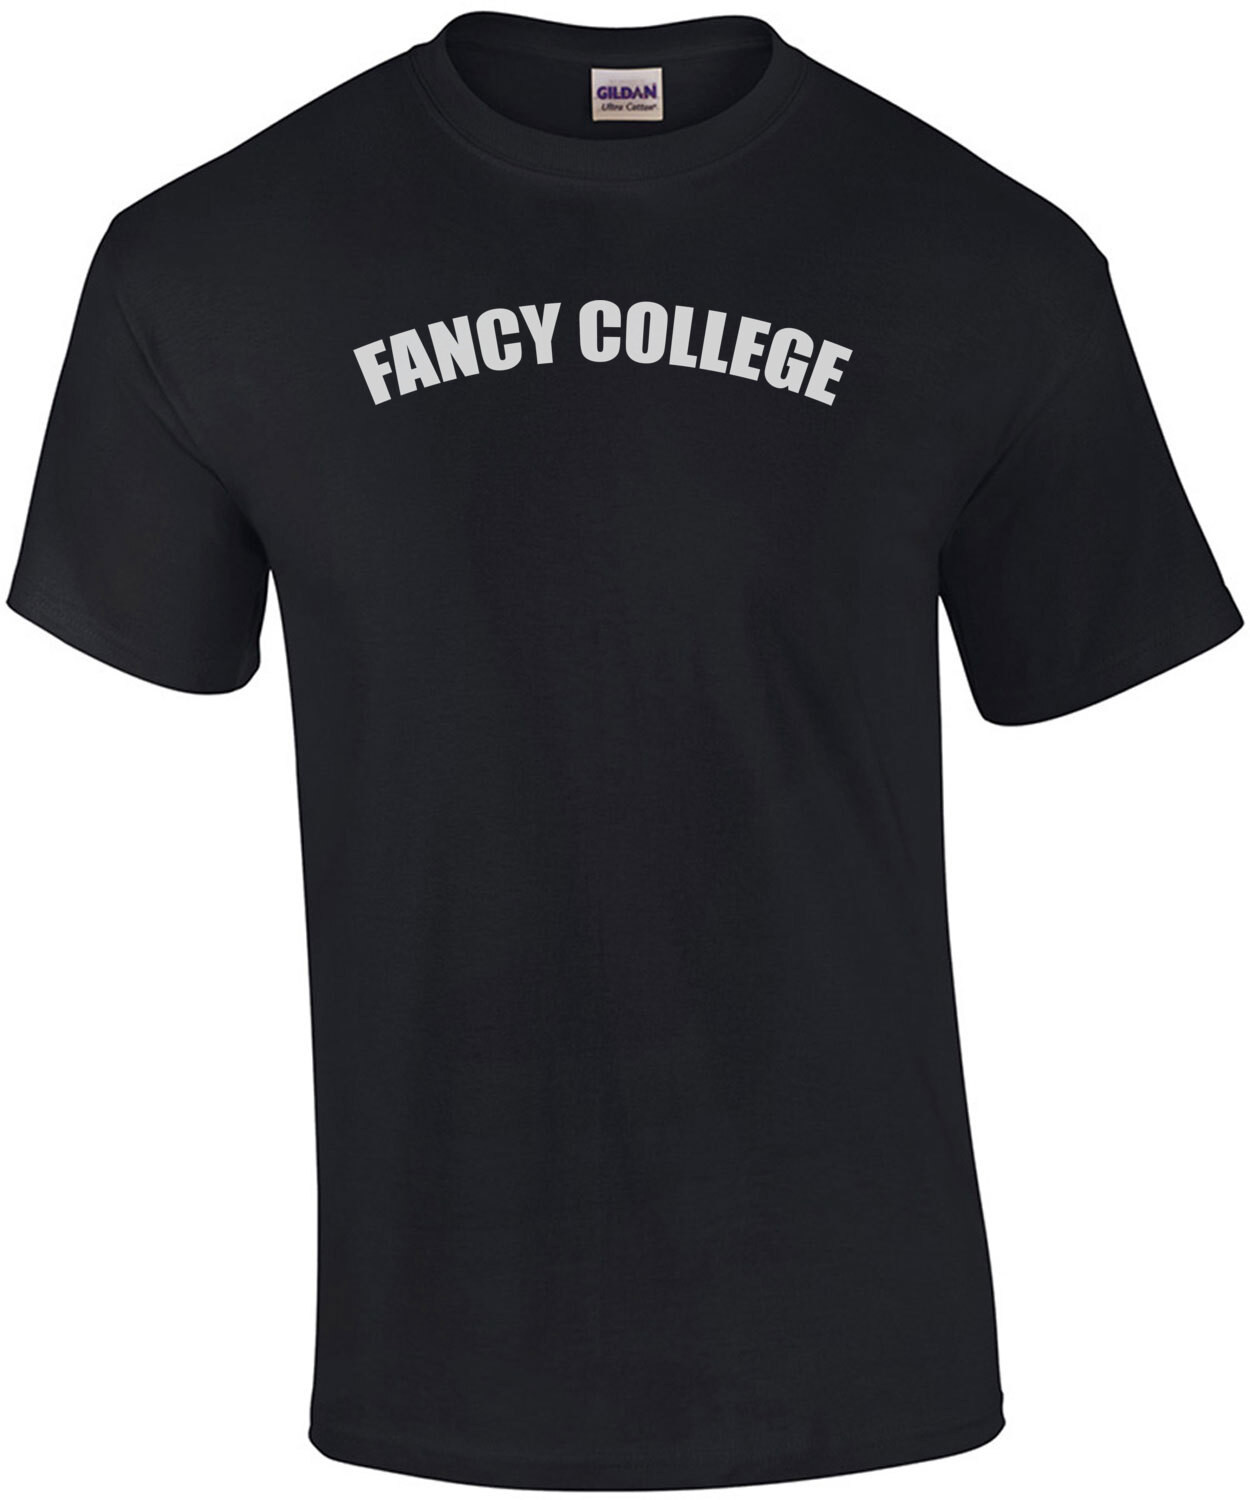 Fancy College - Funny T-Shirt